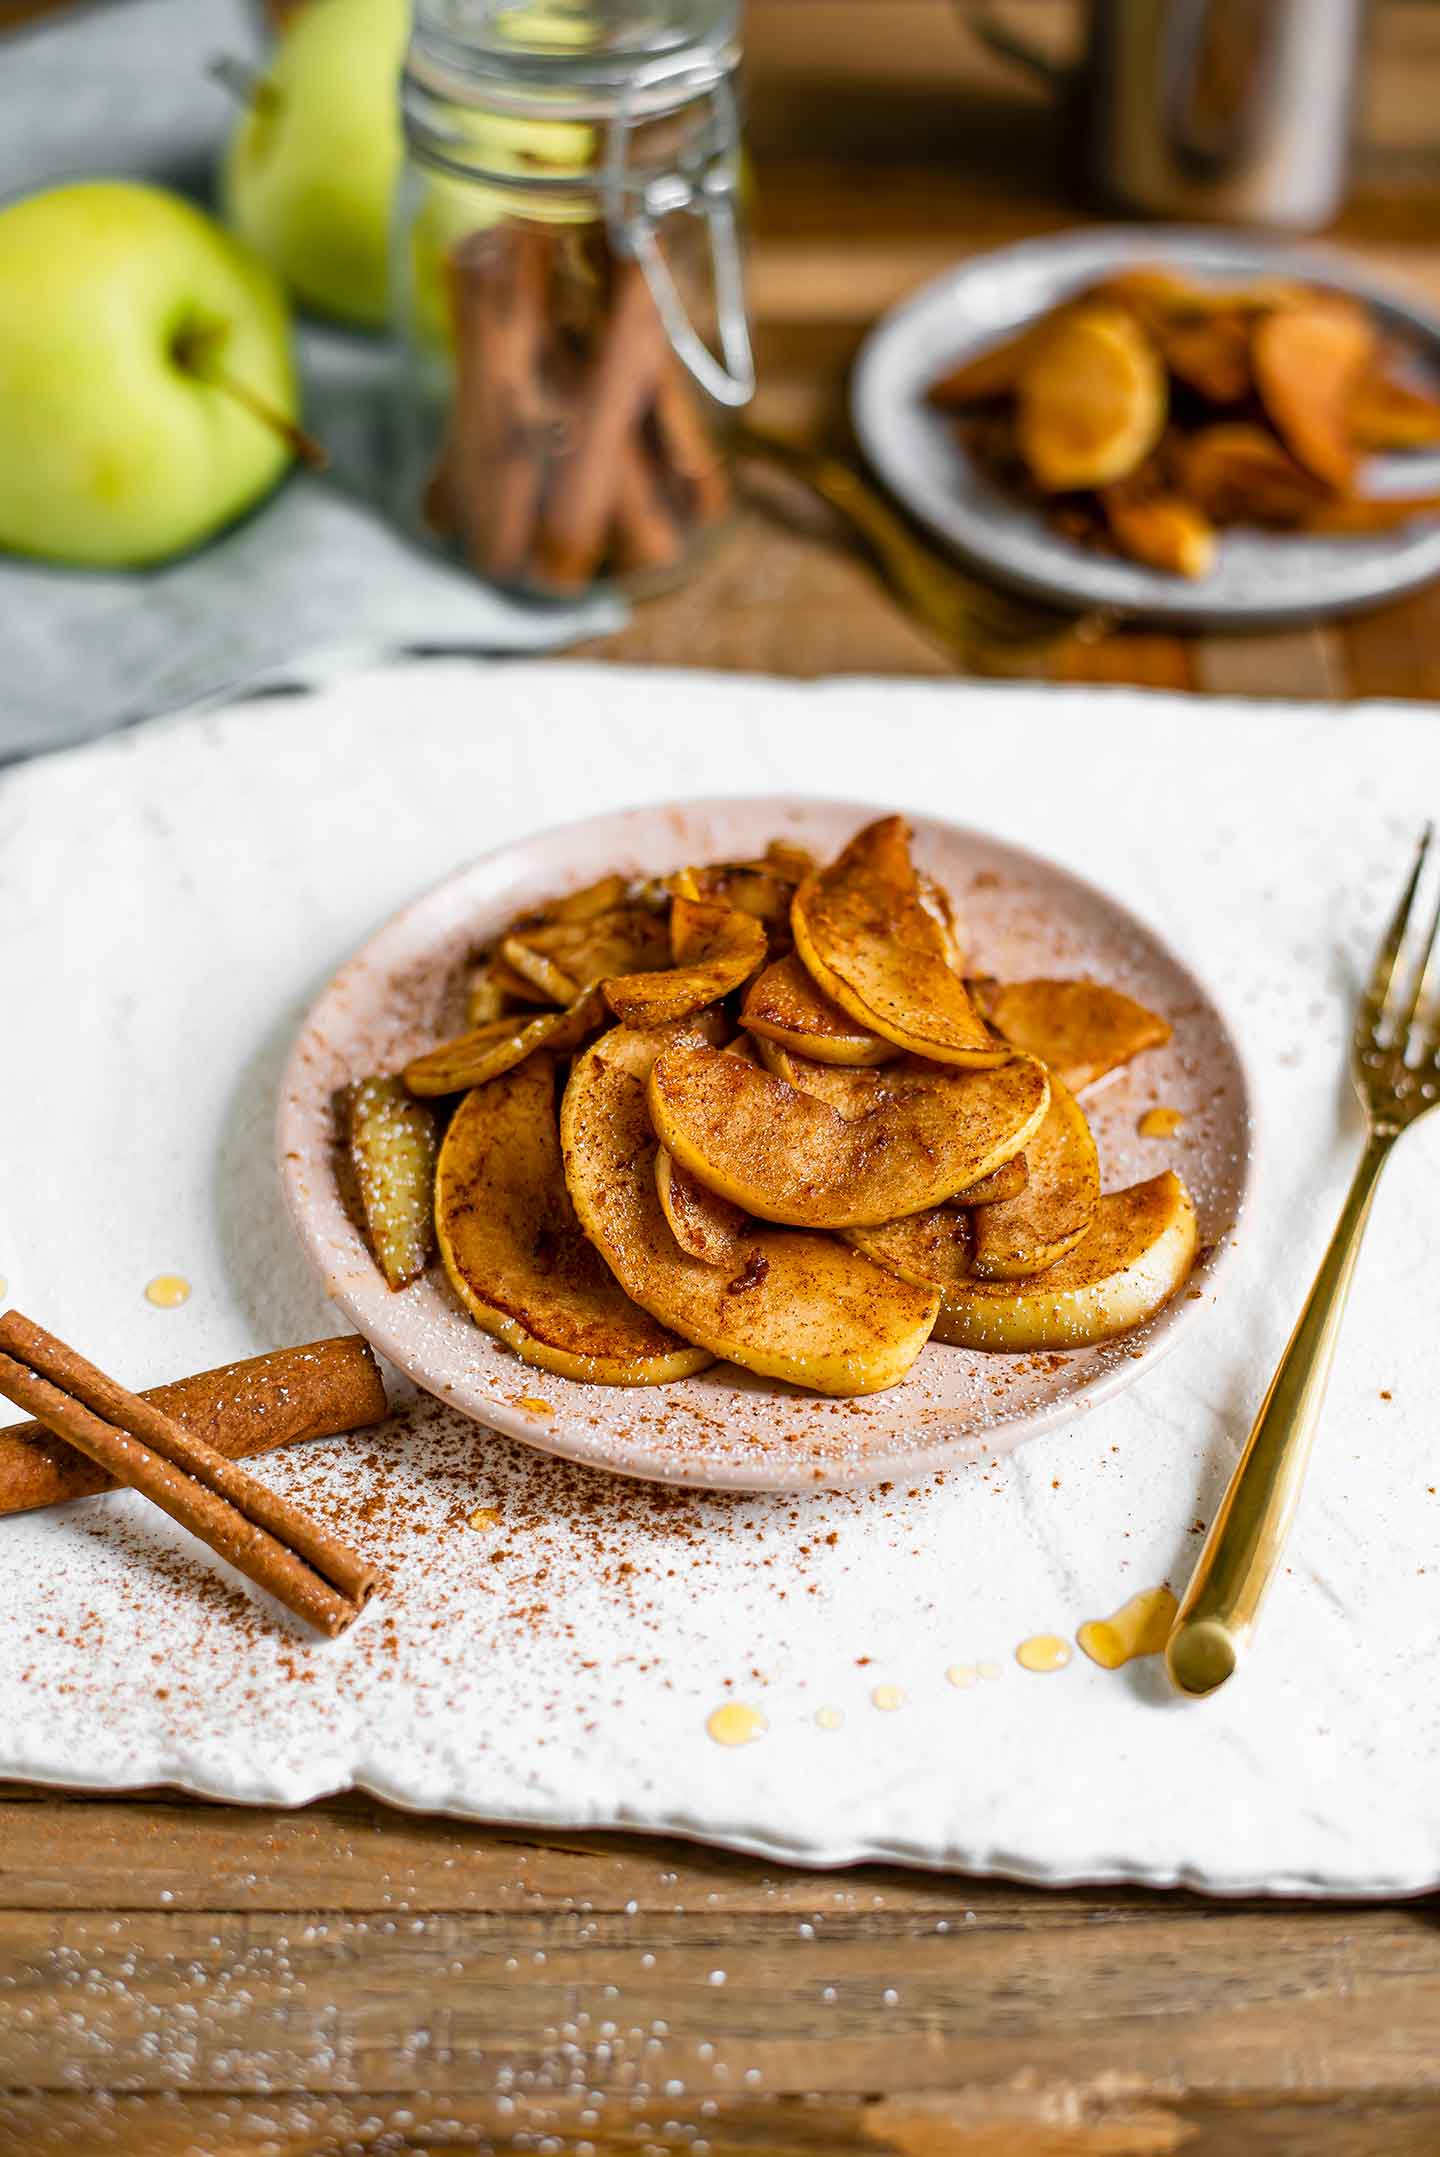 Warm, tender apple slices coated in cinnamon and a dusting of icing sugar are piled on a pink saucer. Apples, cinnamon sticks and another plate of warm cinnamon fried apples sit in the background. Cinnamon, maple syrup, and cinnamon is scattered around the plate.